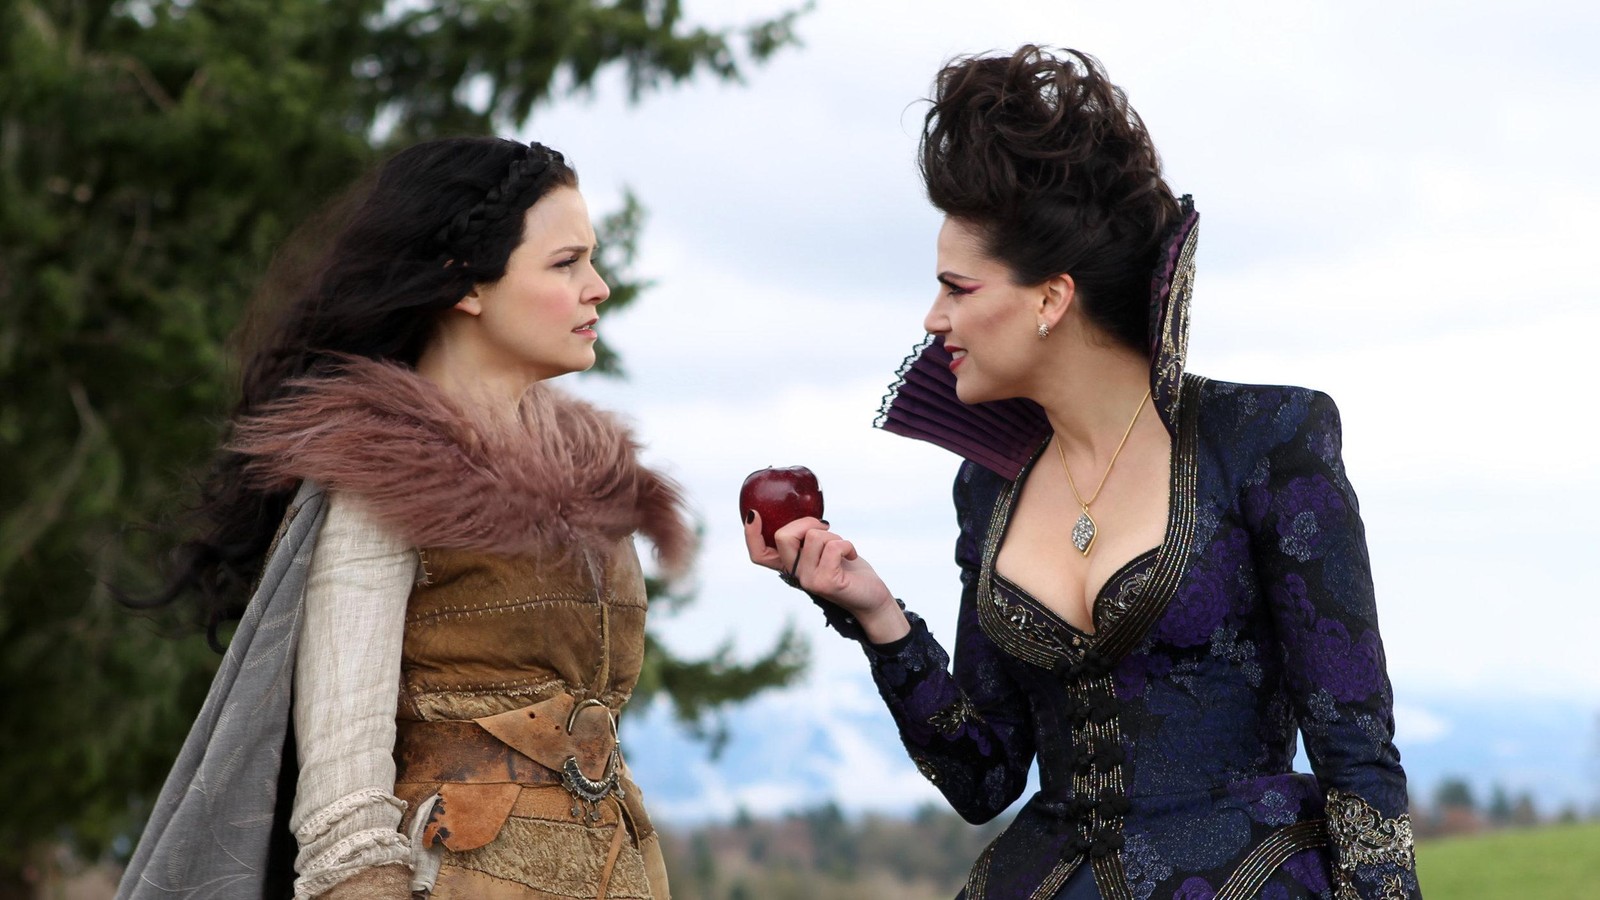 The Evil Queen offers Snow White a choice.  (Image: ABC)